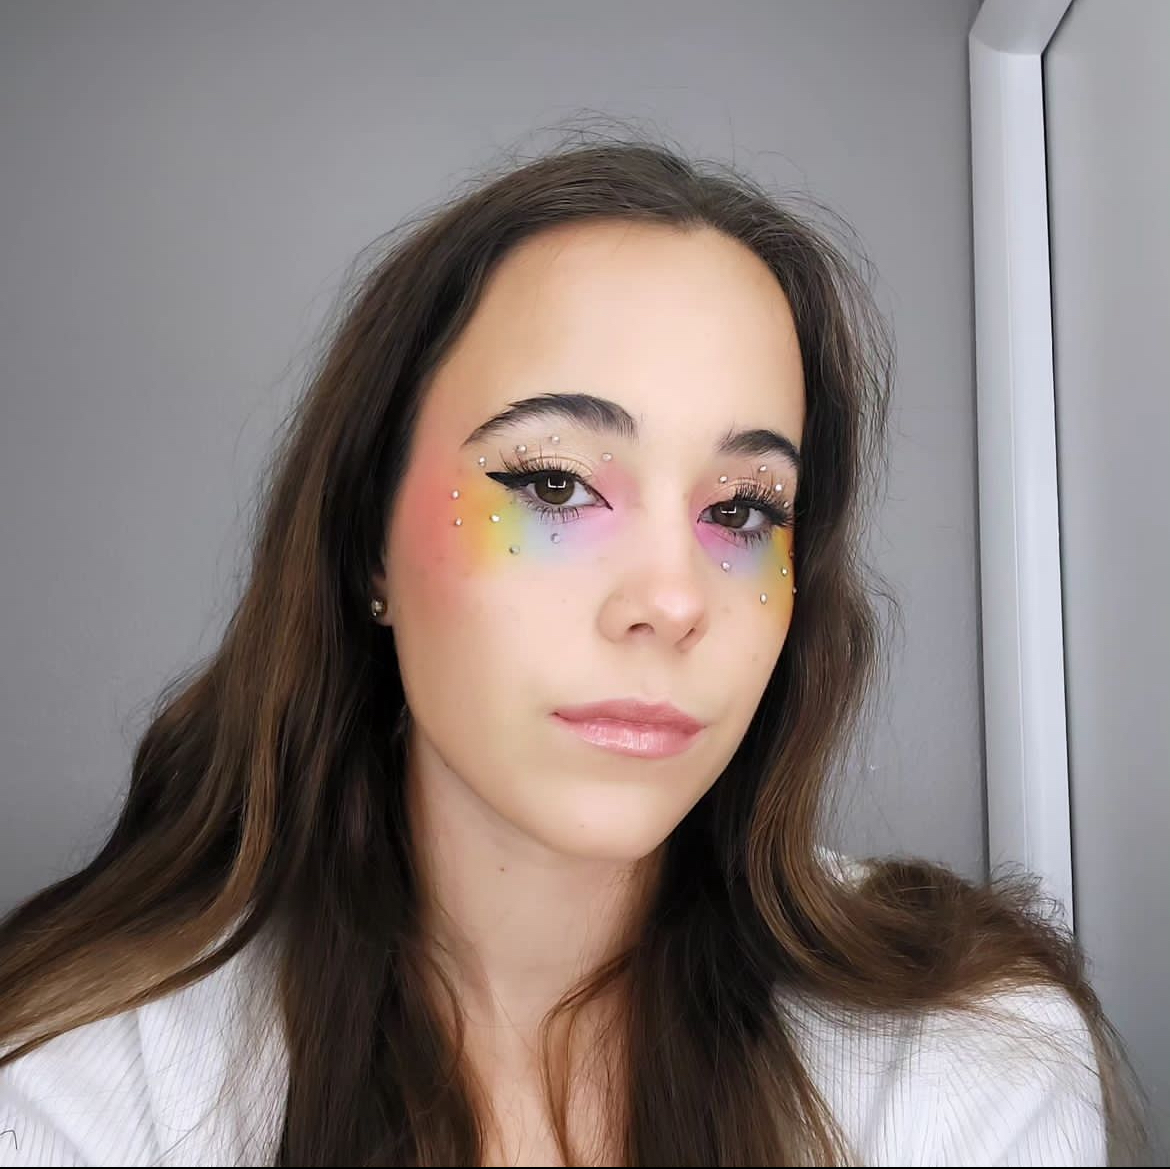 Alivia+Cocchiola%E2%80%99s+%28%E2%80%9825%29+most+recent+makeup+look+of+a+rainbow+blended+eye+shadow+look.+